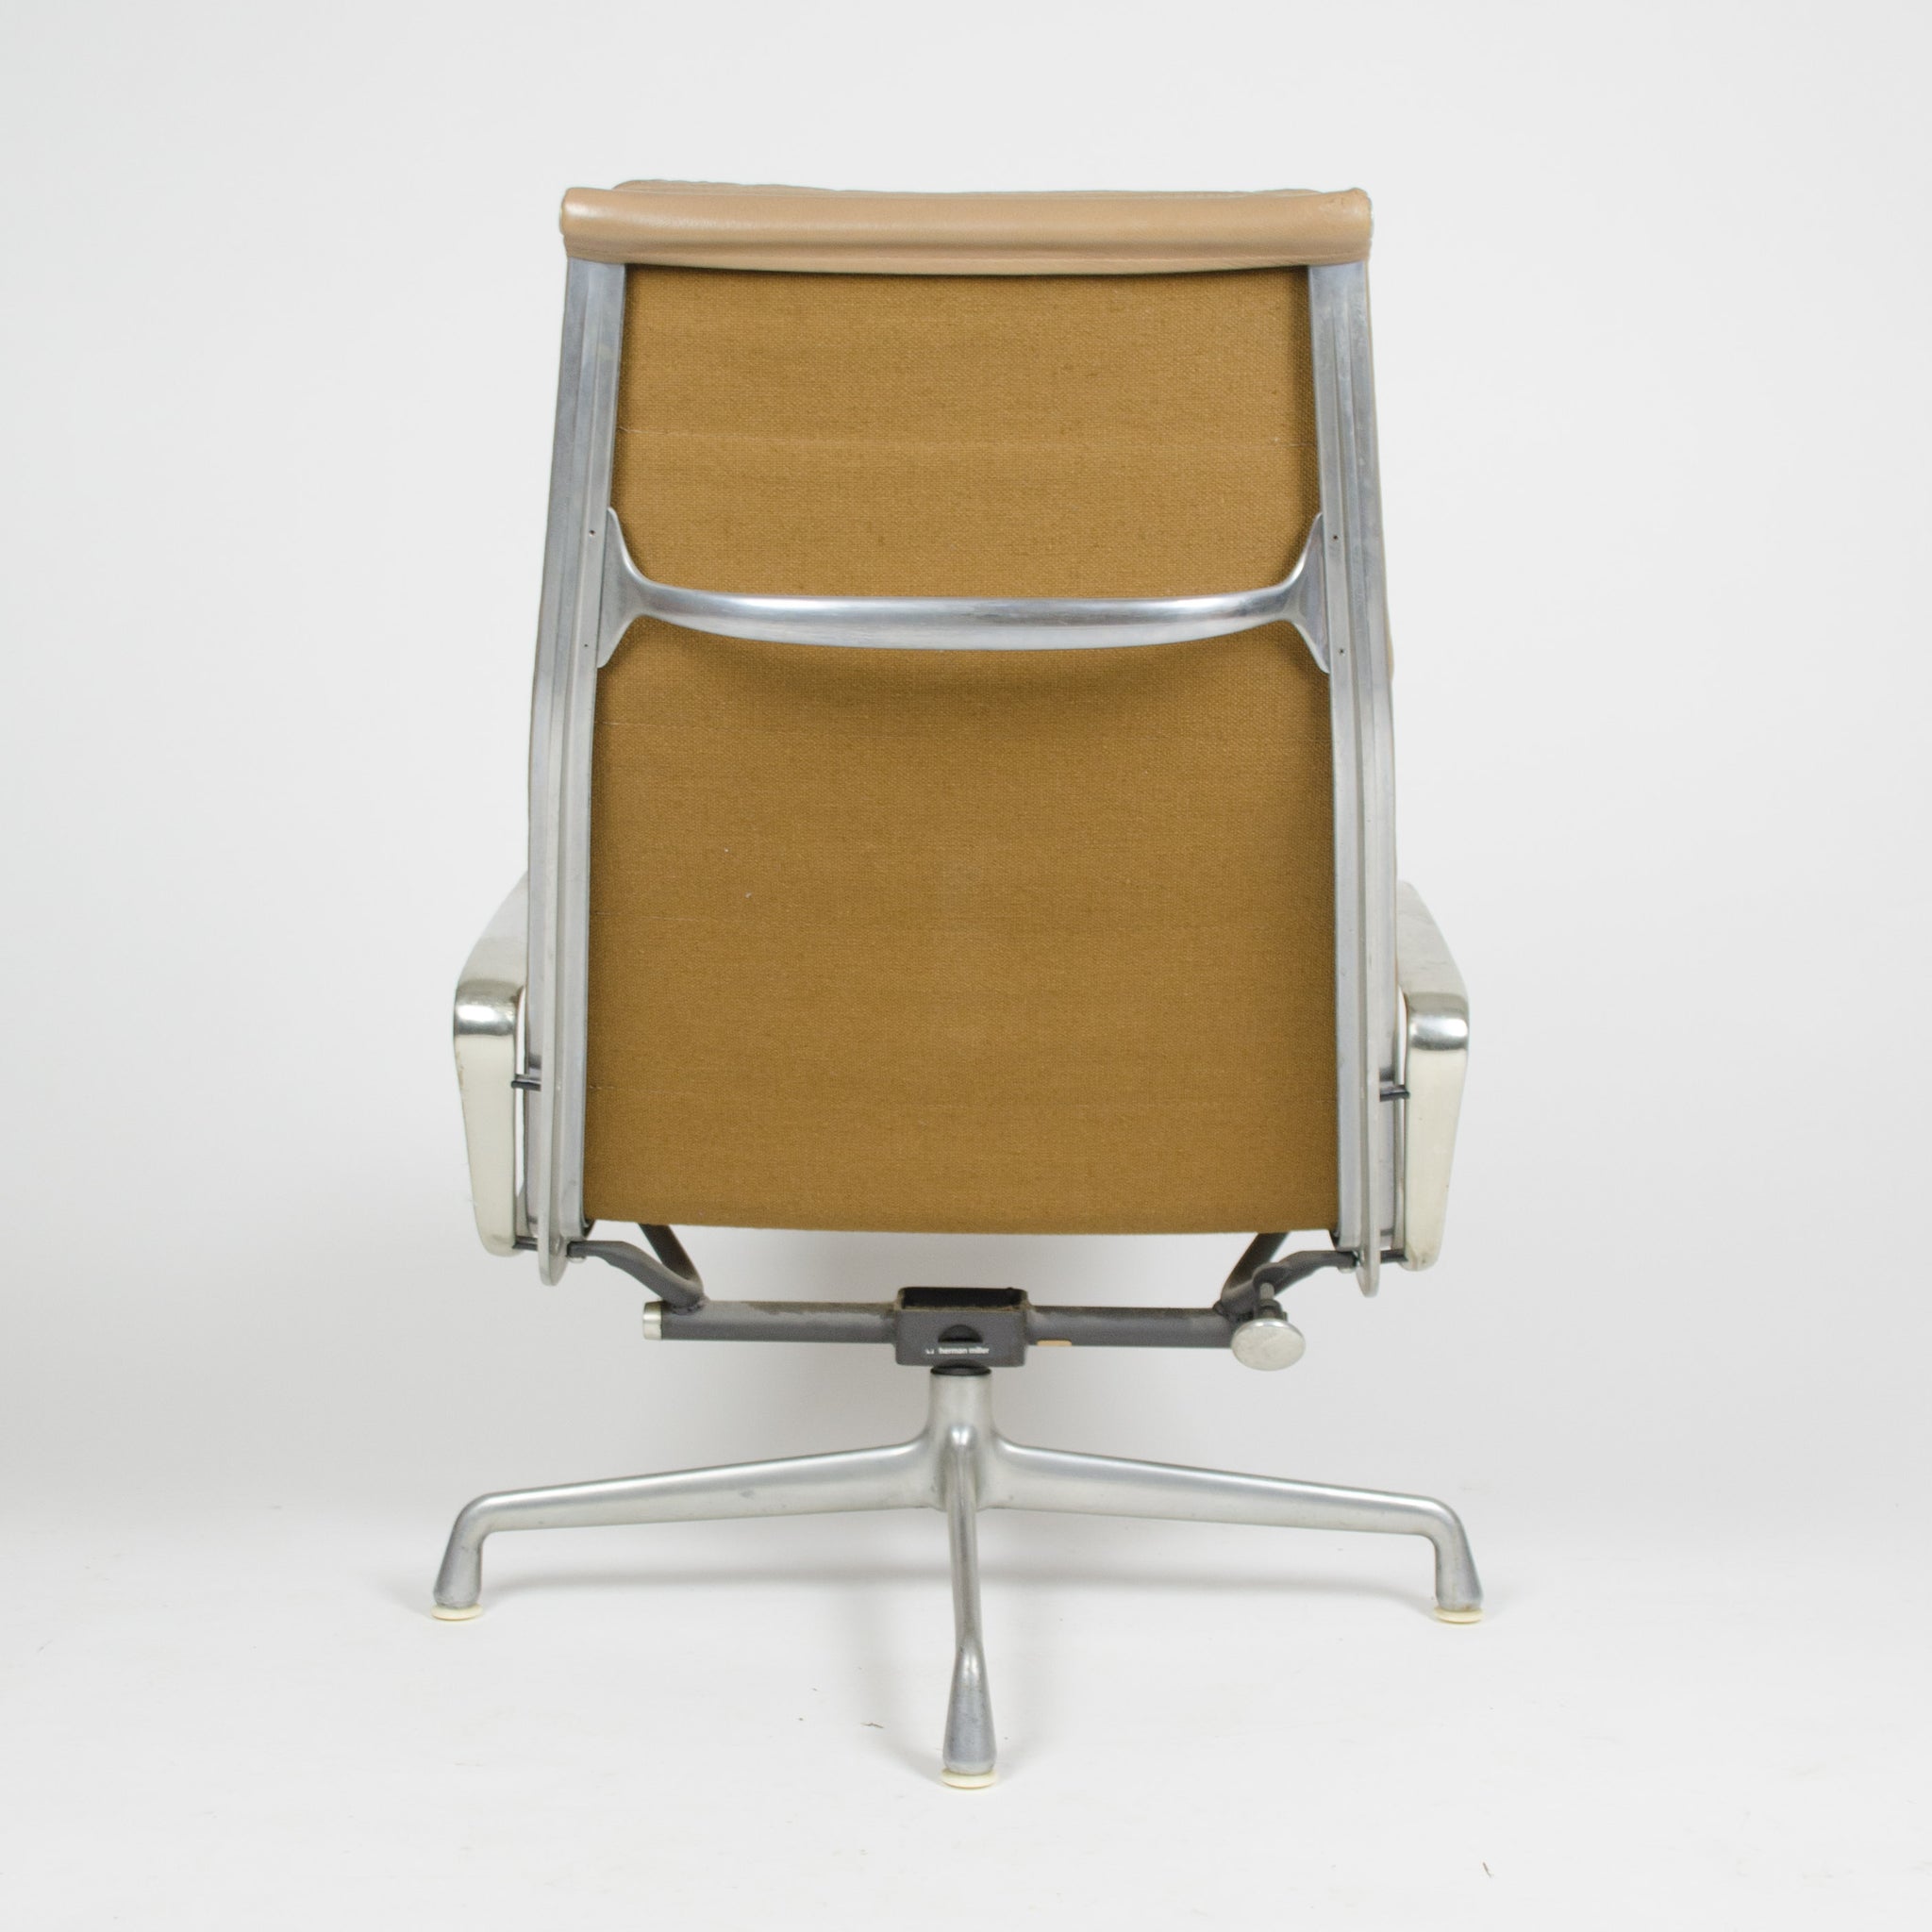 SOLD Herman Miller Eames Soft Pad Lounge Chair with Ottoman Tan 1970's